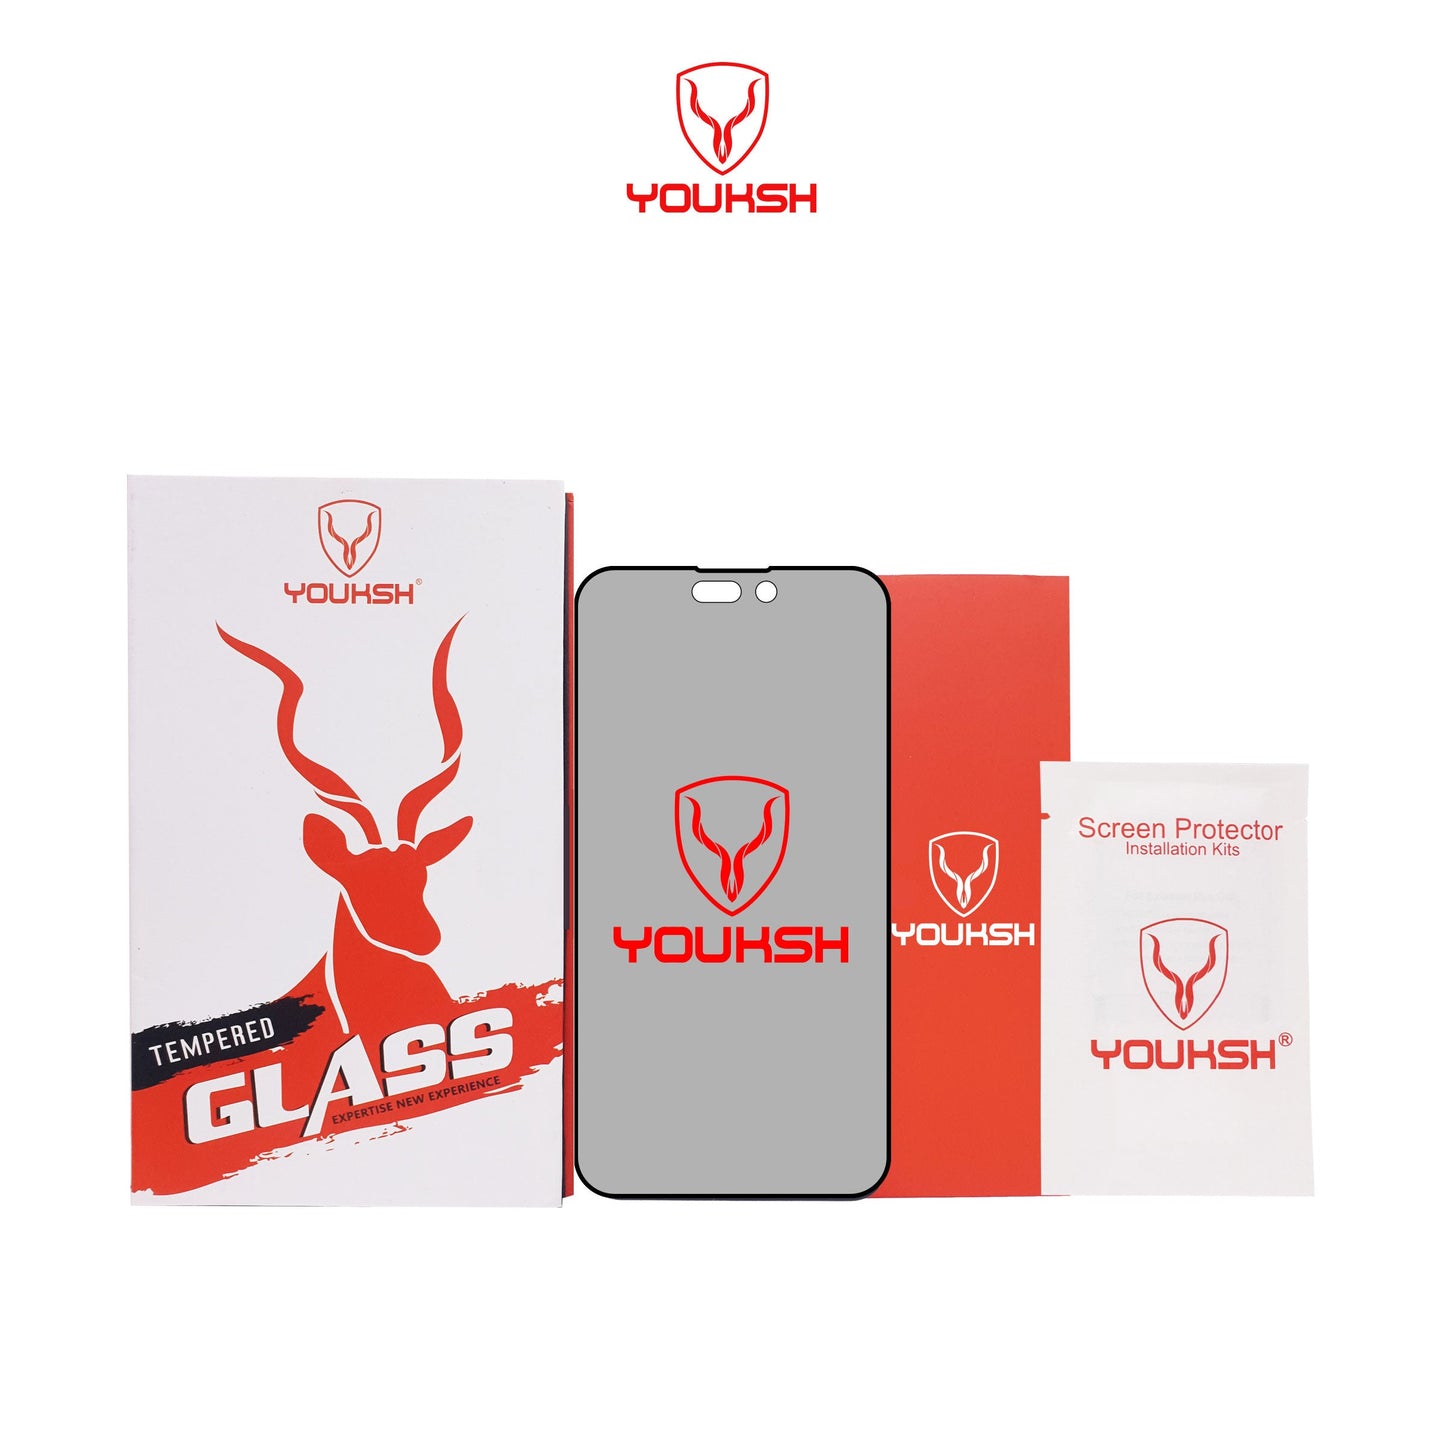 YOUKSH Apple iPhone 14 Pro (6.1) Privacy Glass Protector - YOUKSH Apple iPhone 14 Pro (6.1) Anti Static Glass Protector - With YOUKSH Installation kit.